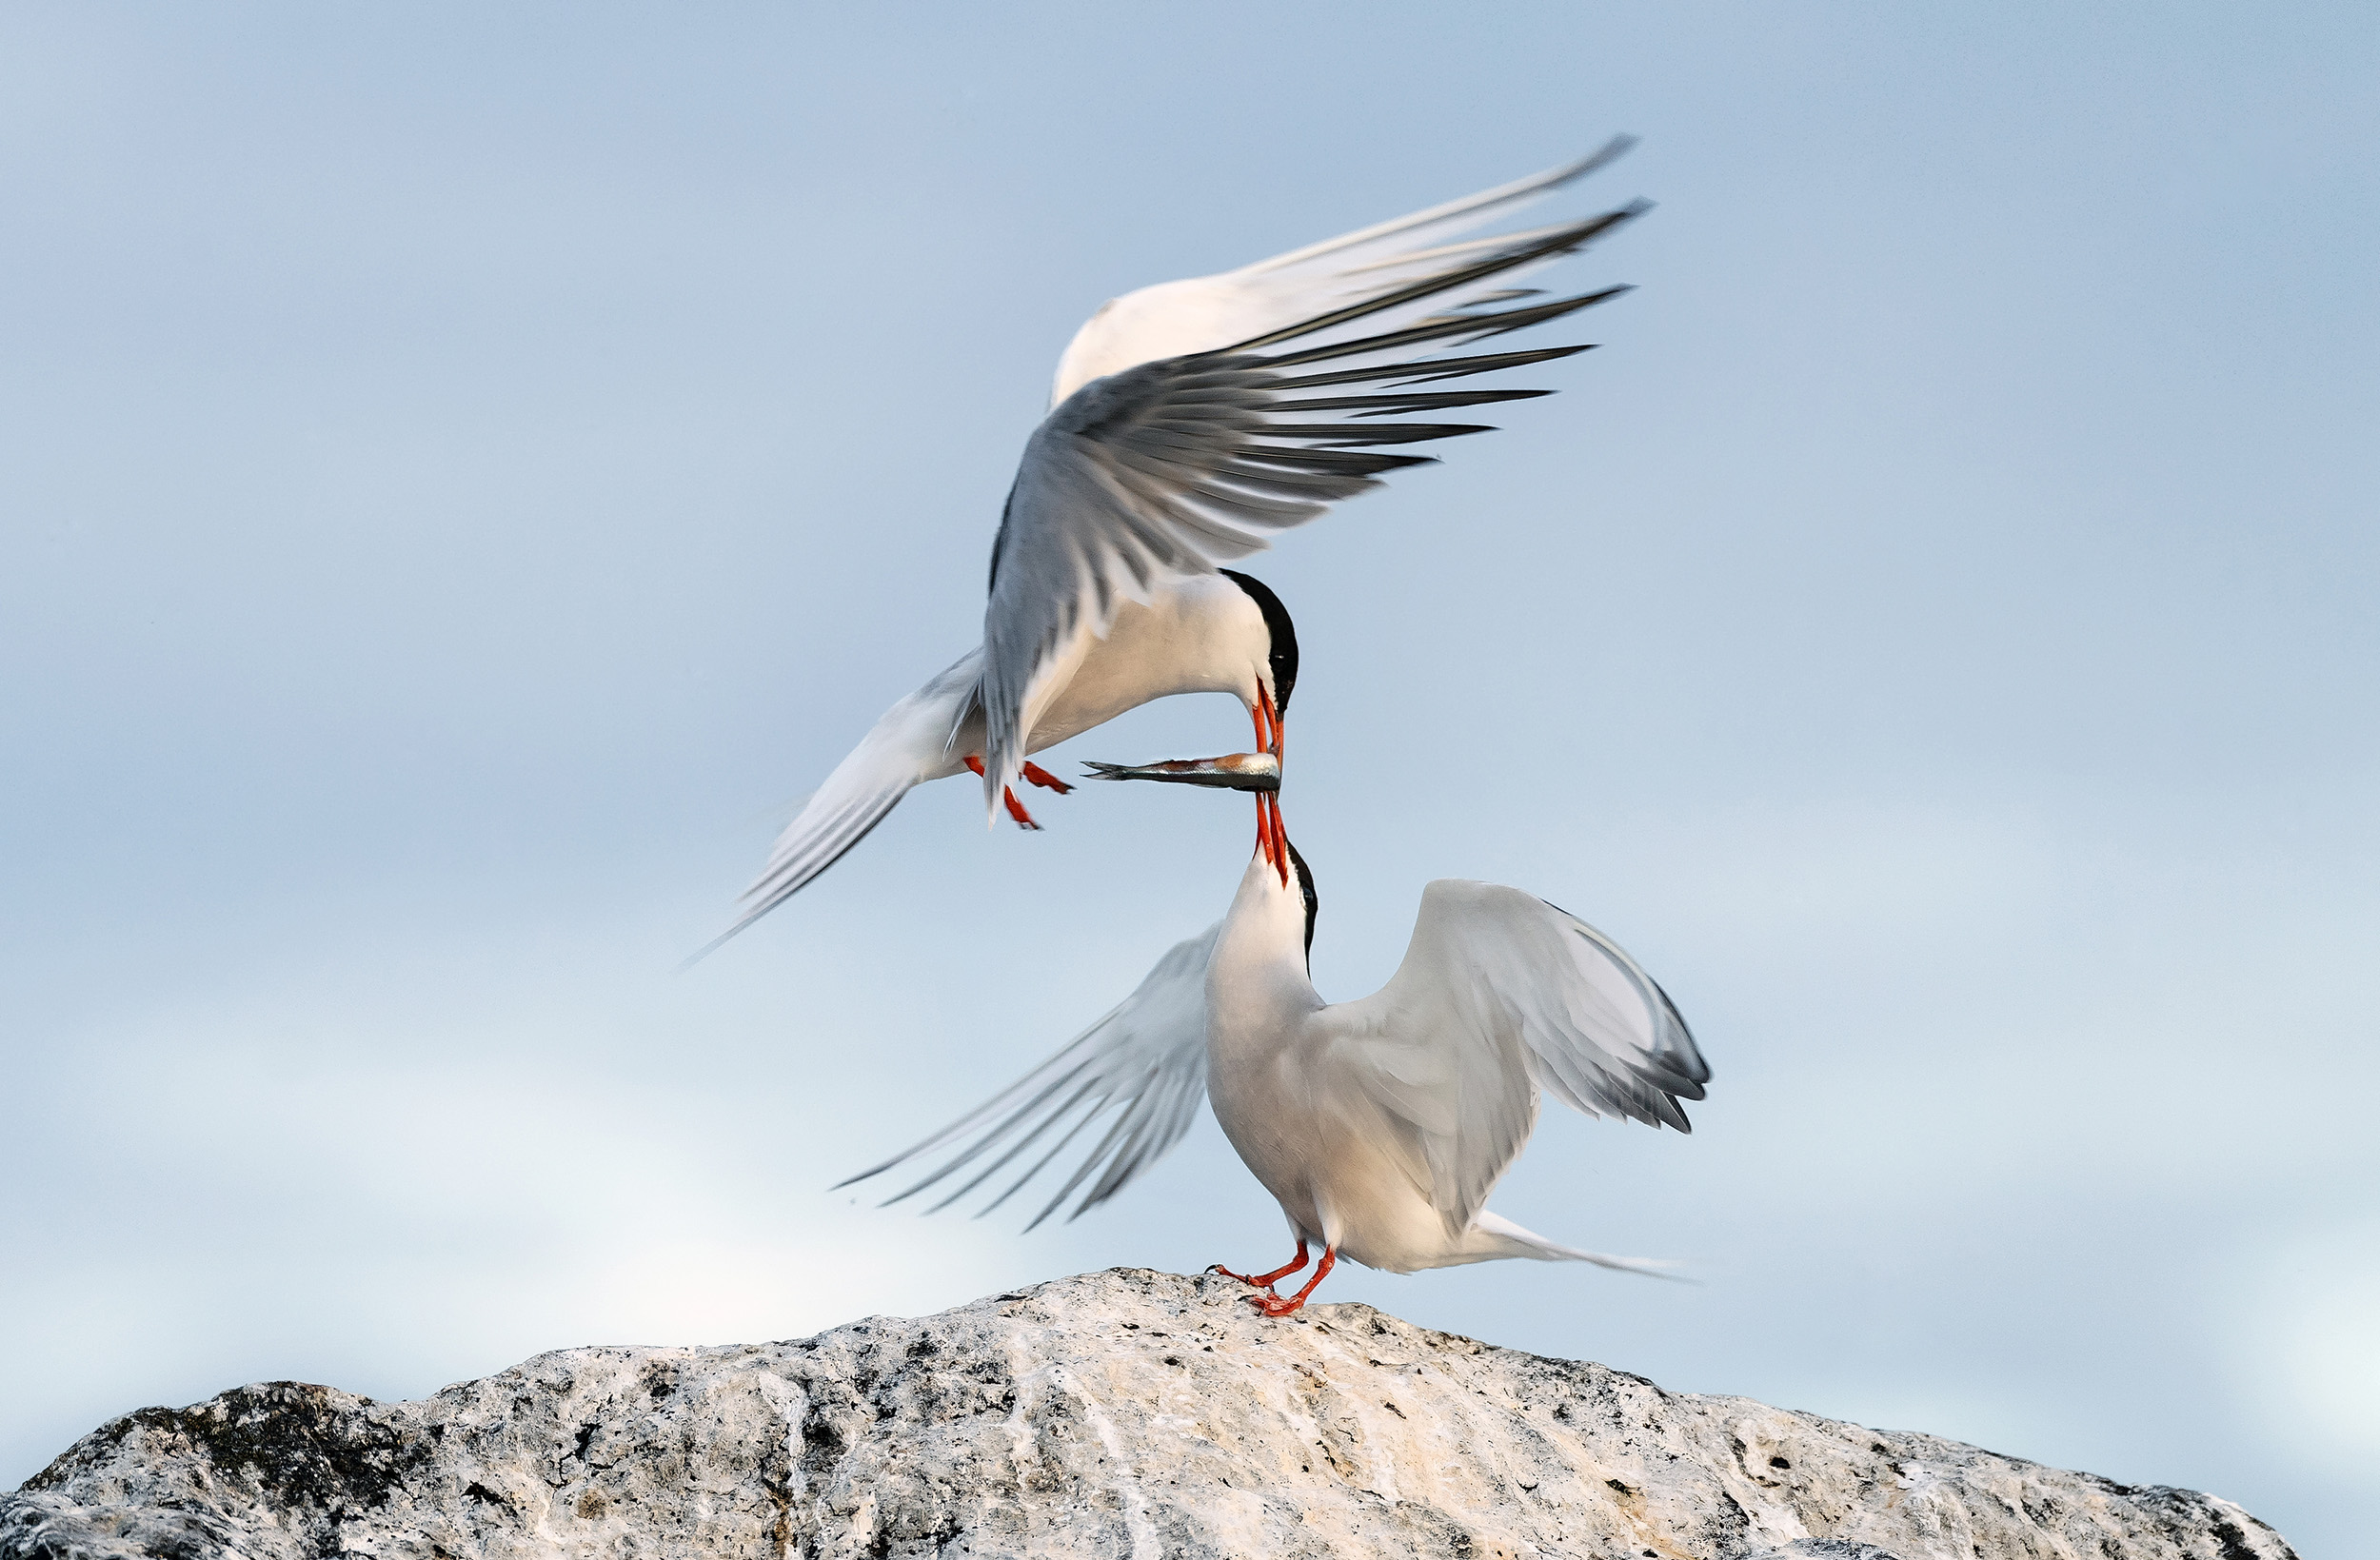 Adult Common Tern feeding a fish to a juvenile Common Tern